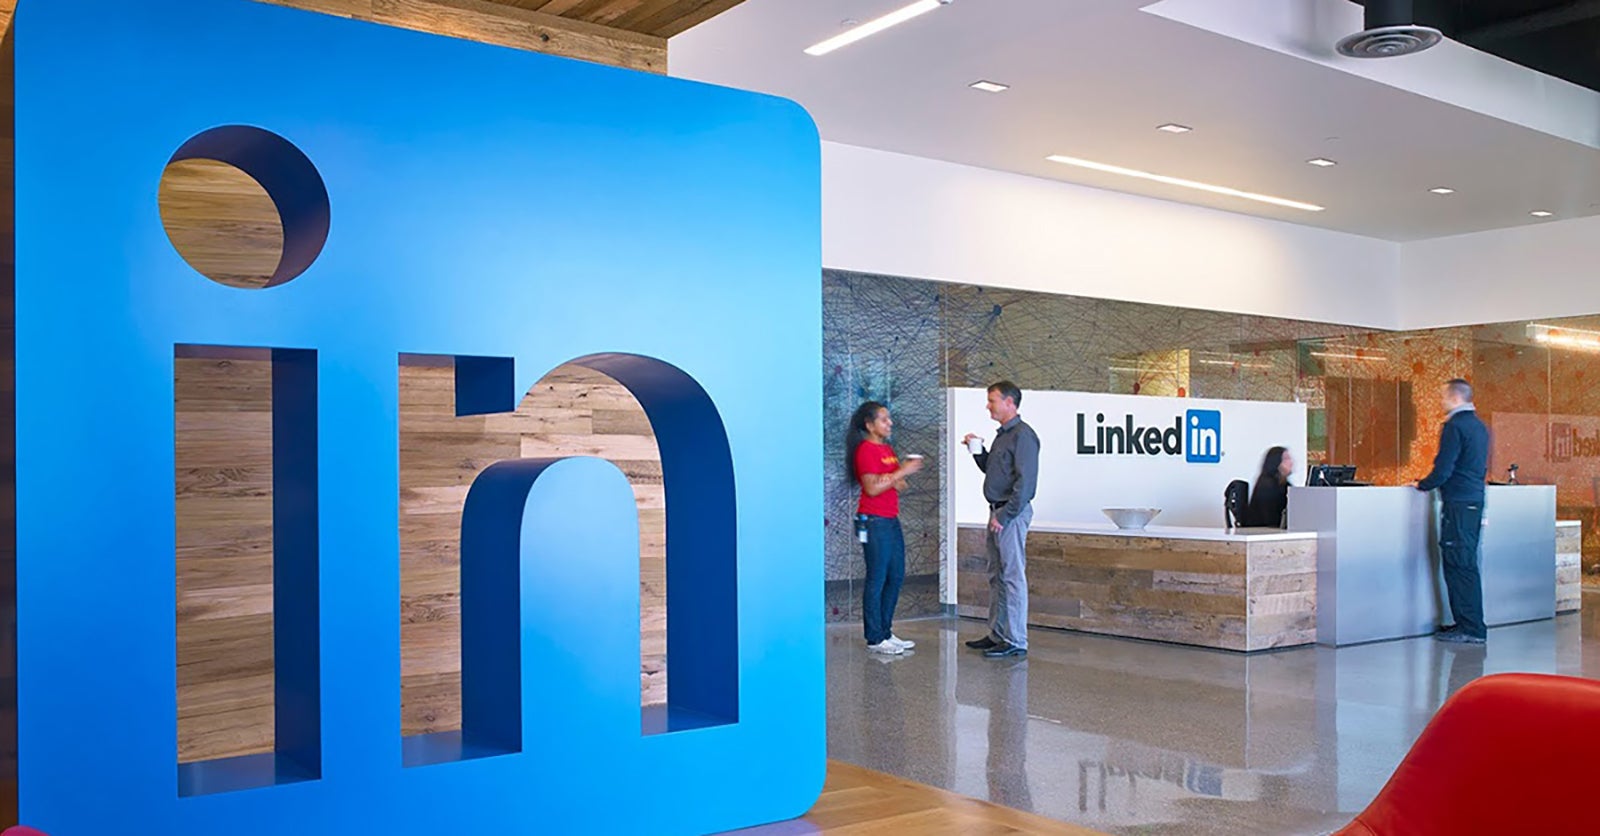 LinkedIn will cut 6% of its workforce as the pandemic slams recruitment -  WISH-TV | Indianapolis News | Indiana Weather | Indiana Traffic